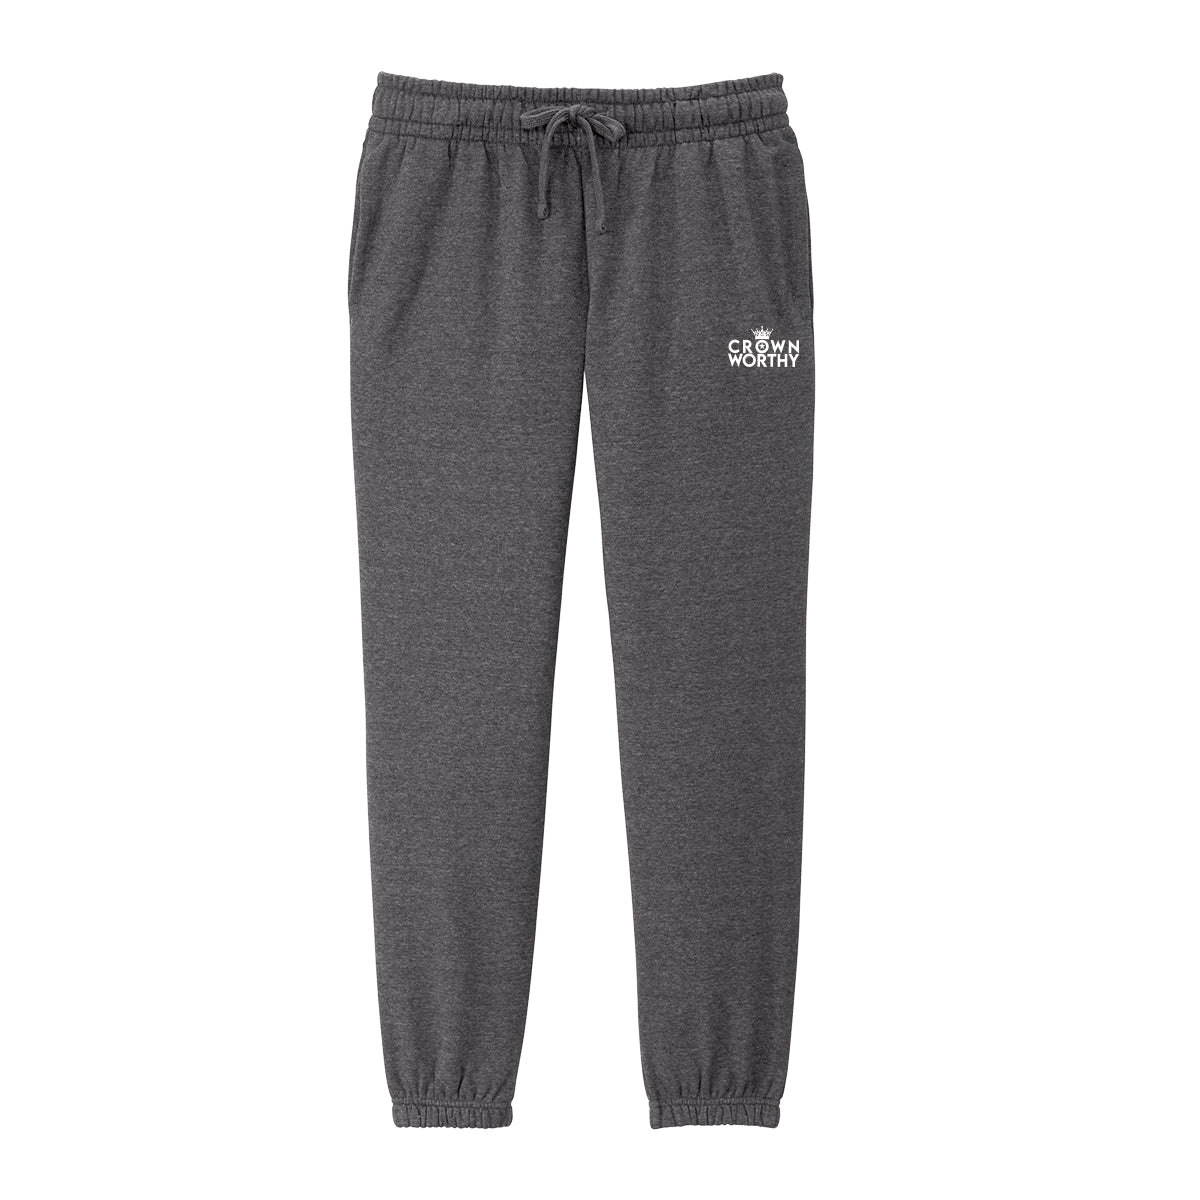 Crown Worthy Joggers